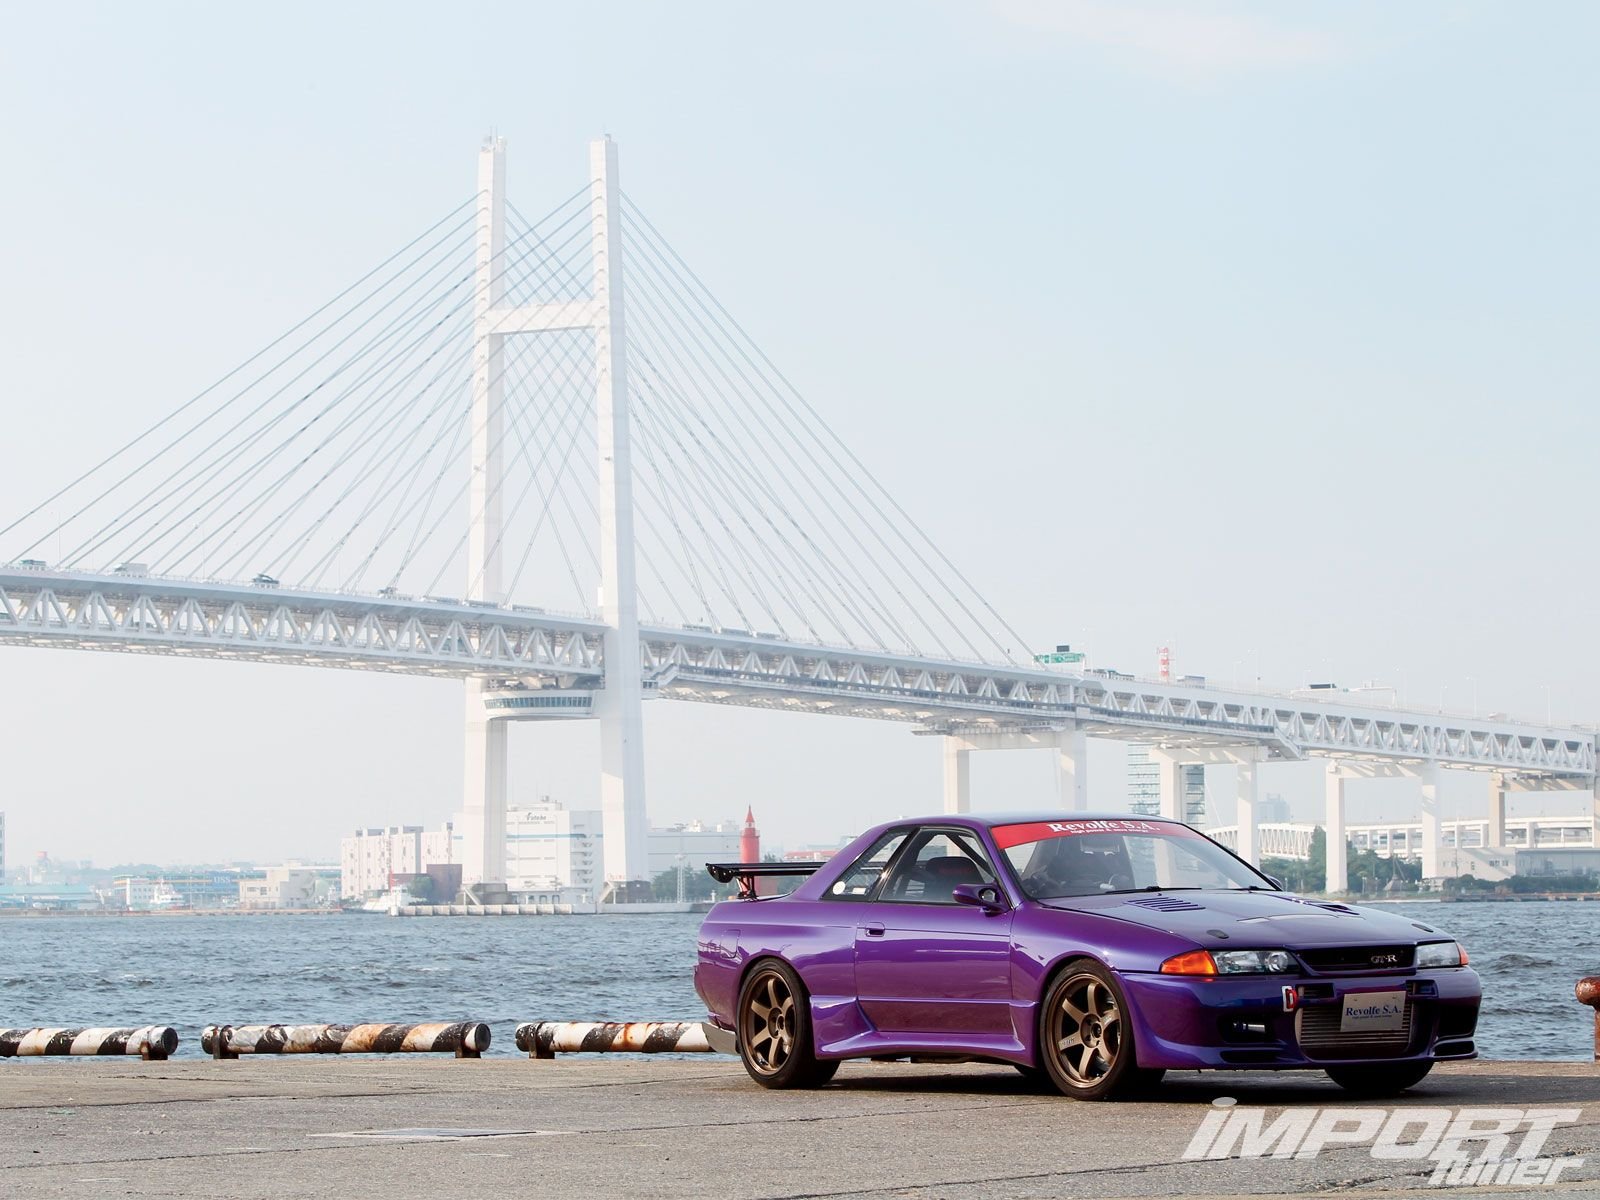 nissan, R34, Skyline, Gtr, Supercars, Cars, Coupe, Tuning, Japan Wallpaper